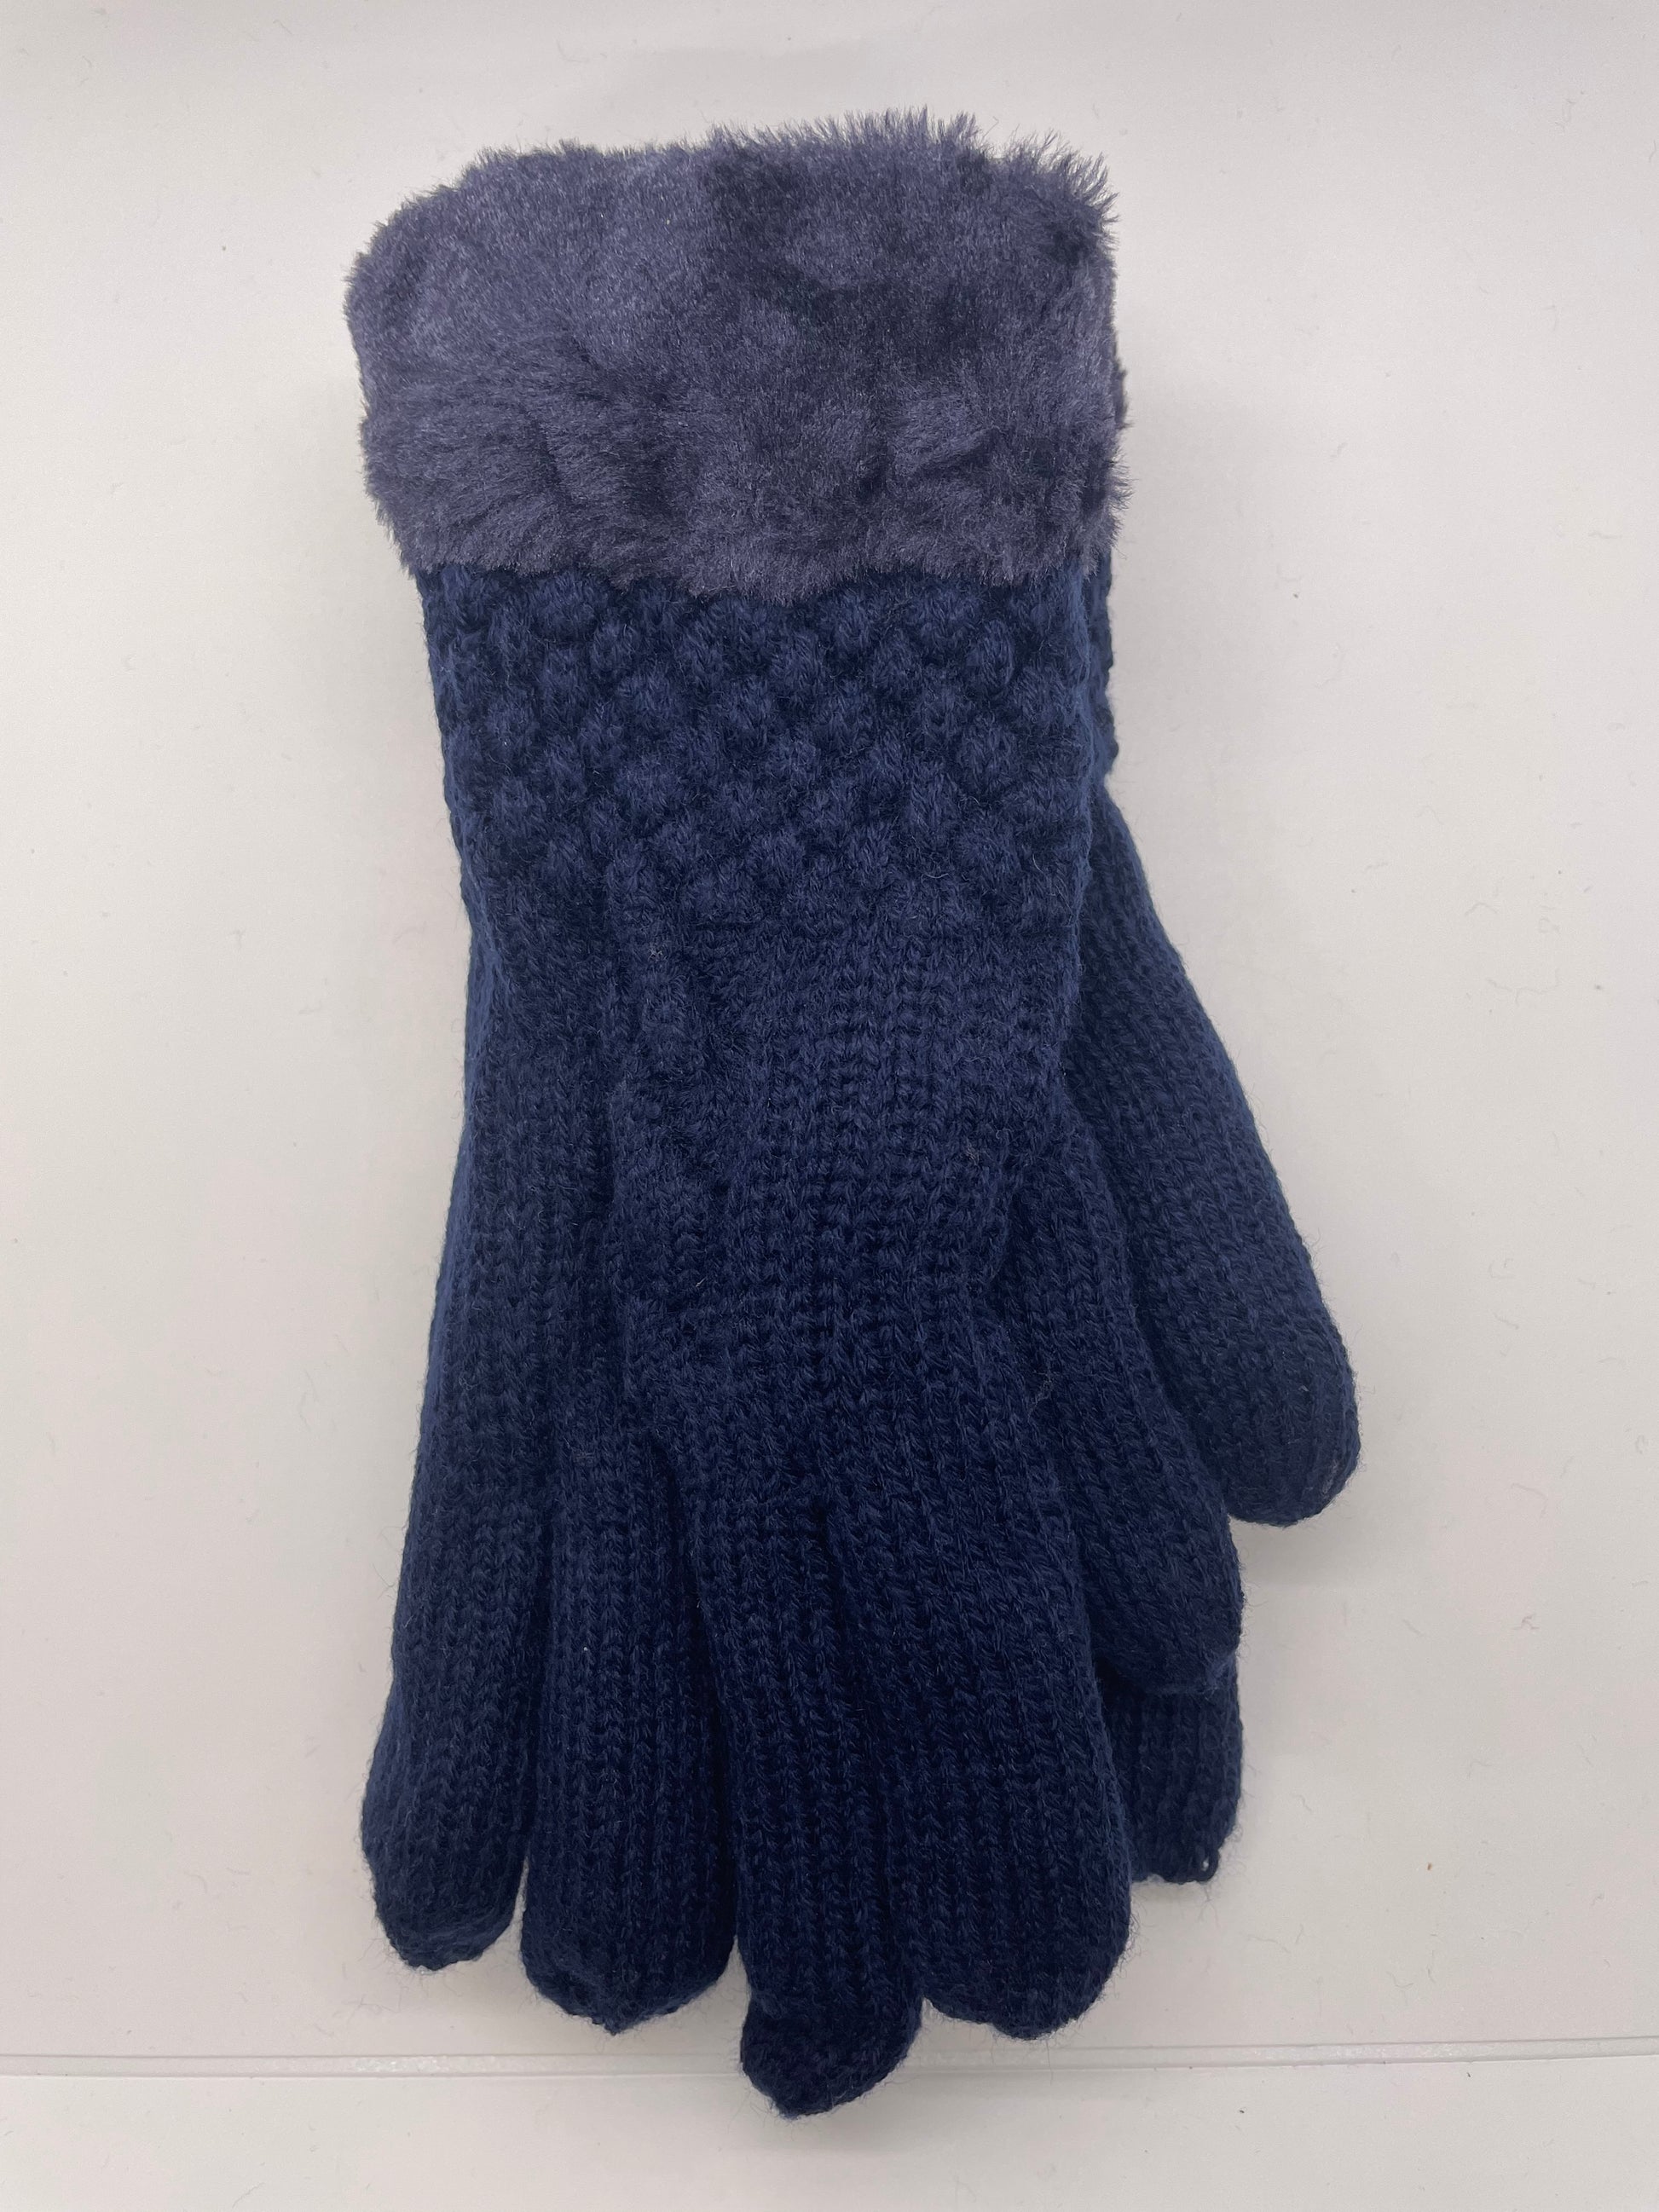 Navy blue women's winter gloves with a quilted texture